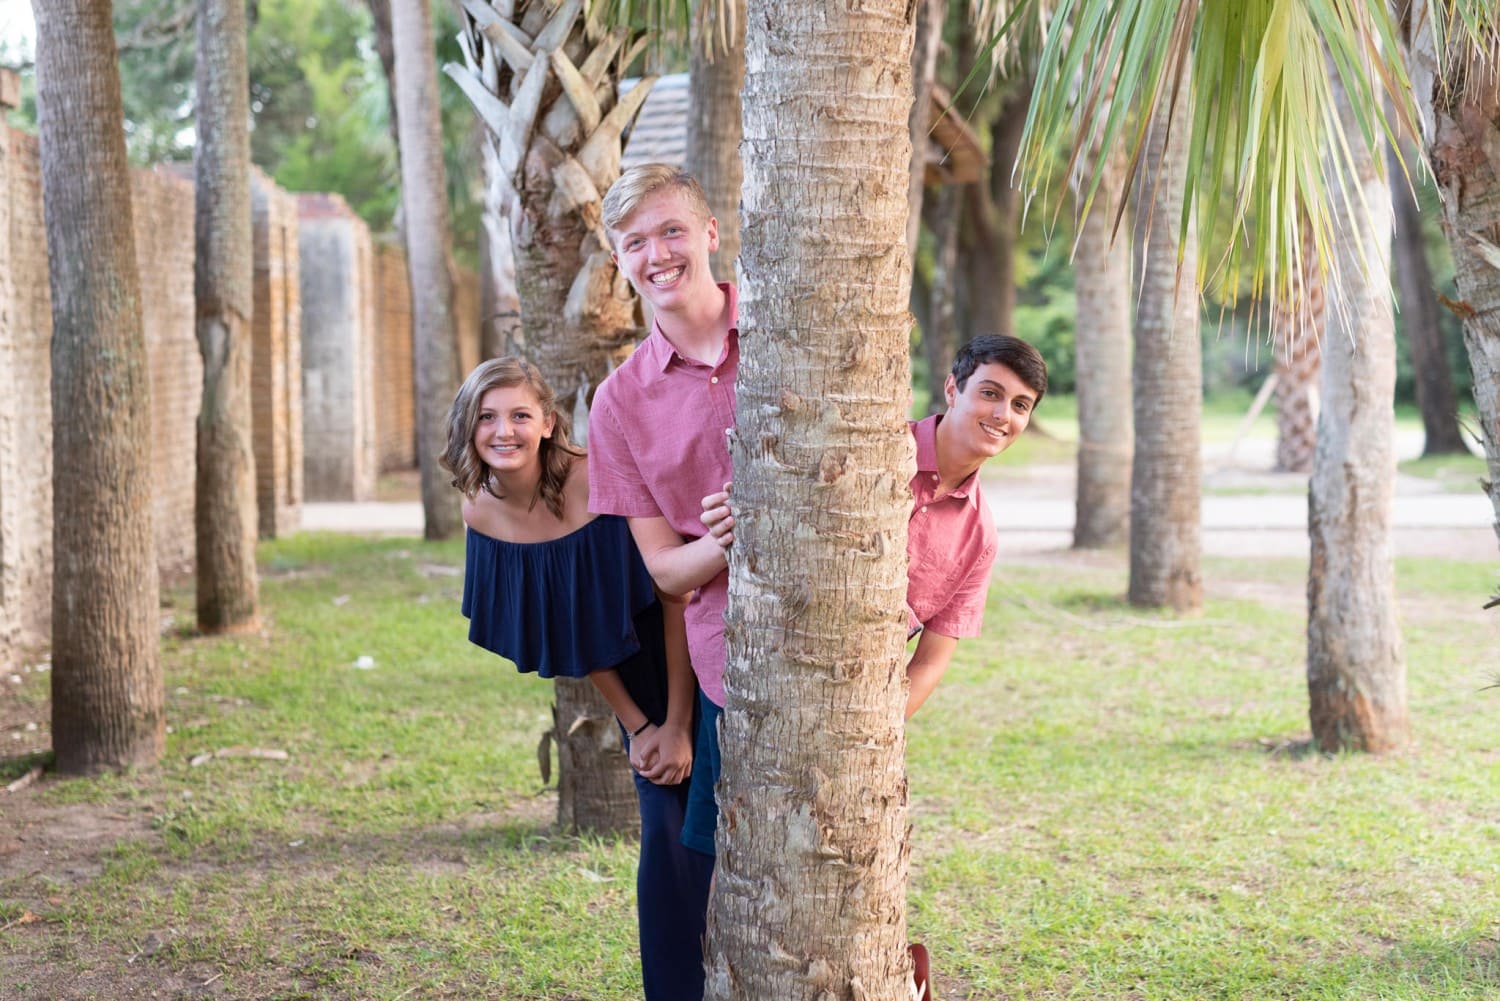 Kids peeking out from behind a tree - Huntington Beach State Park